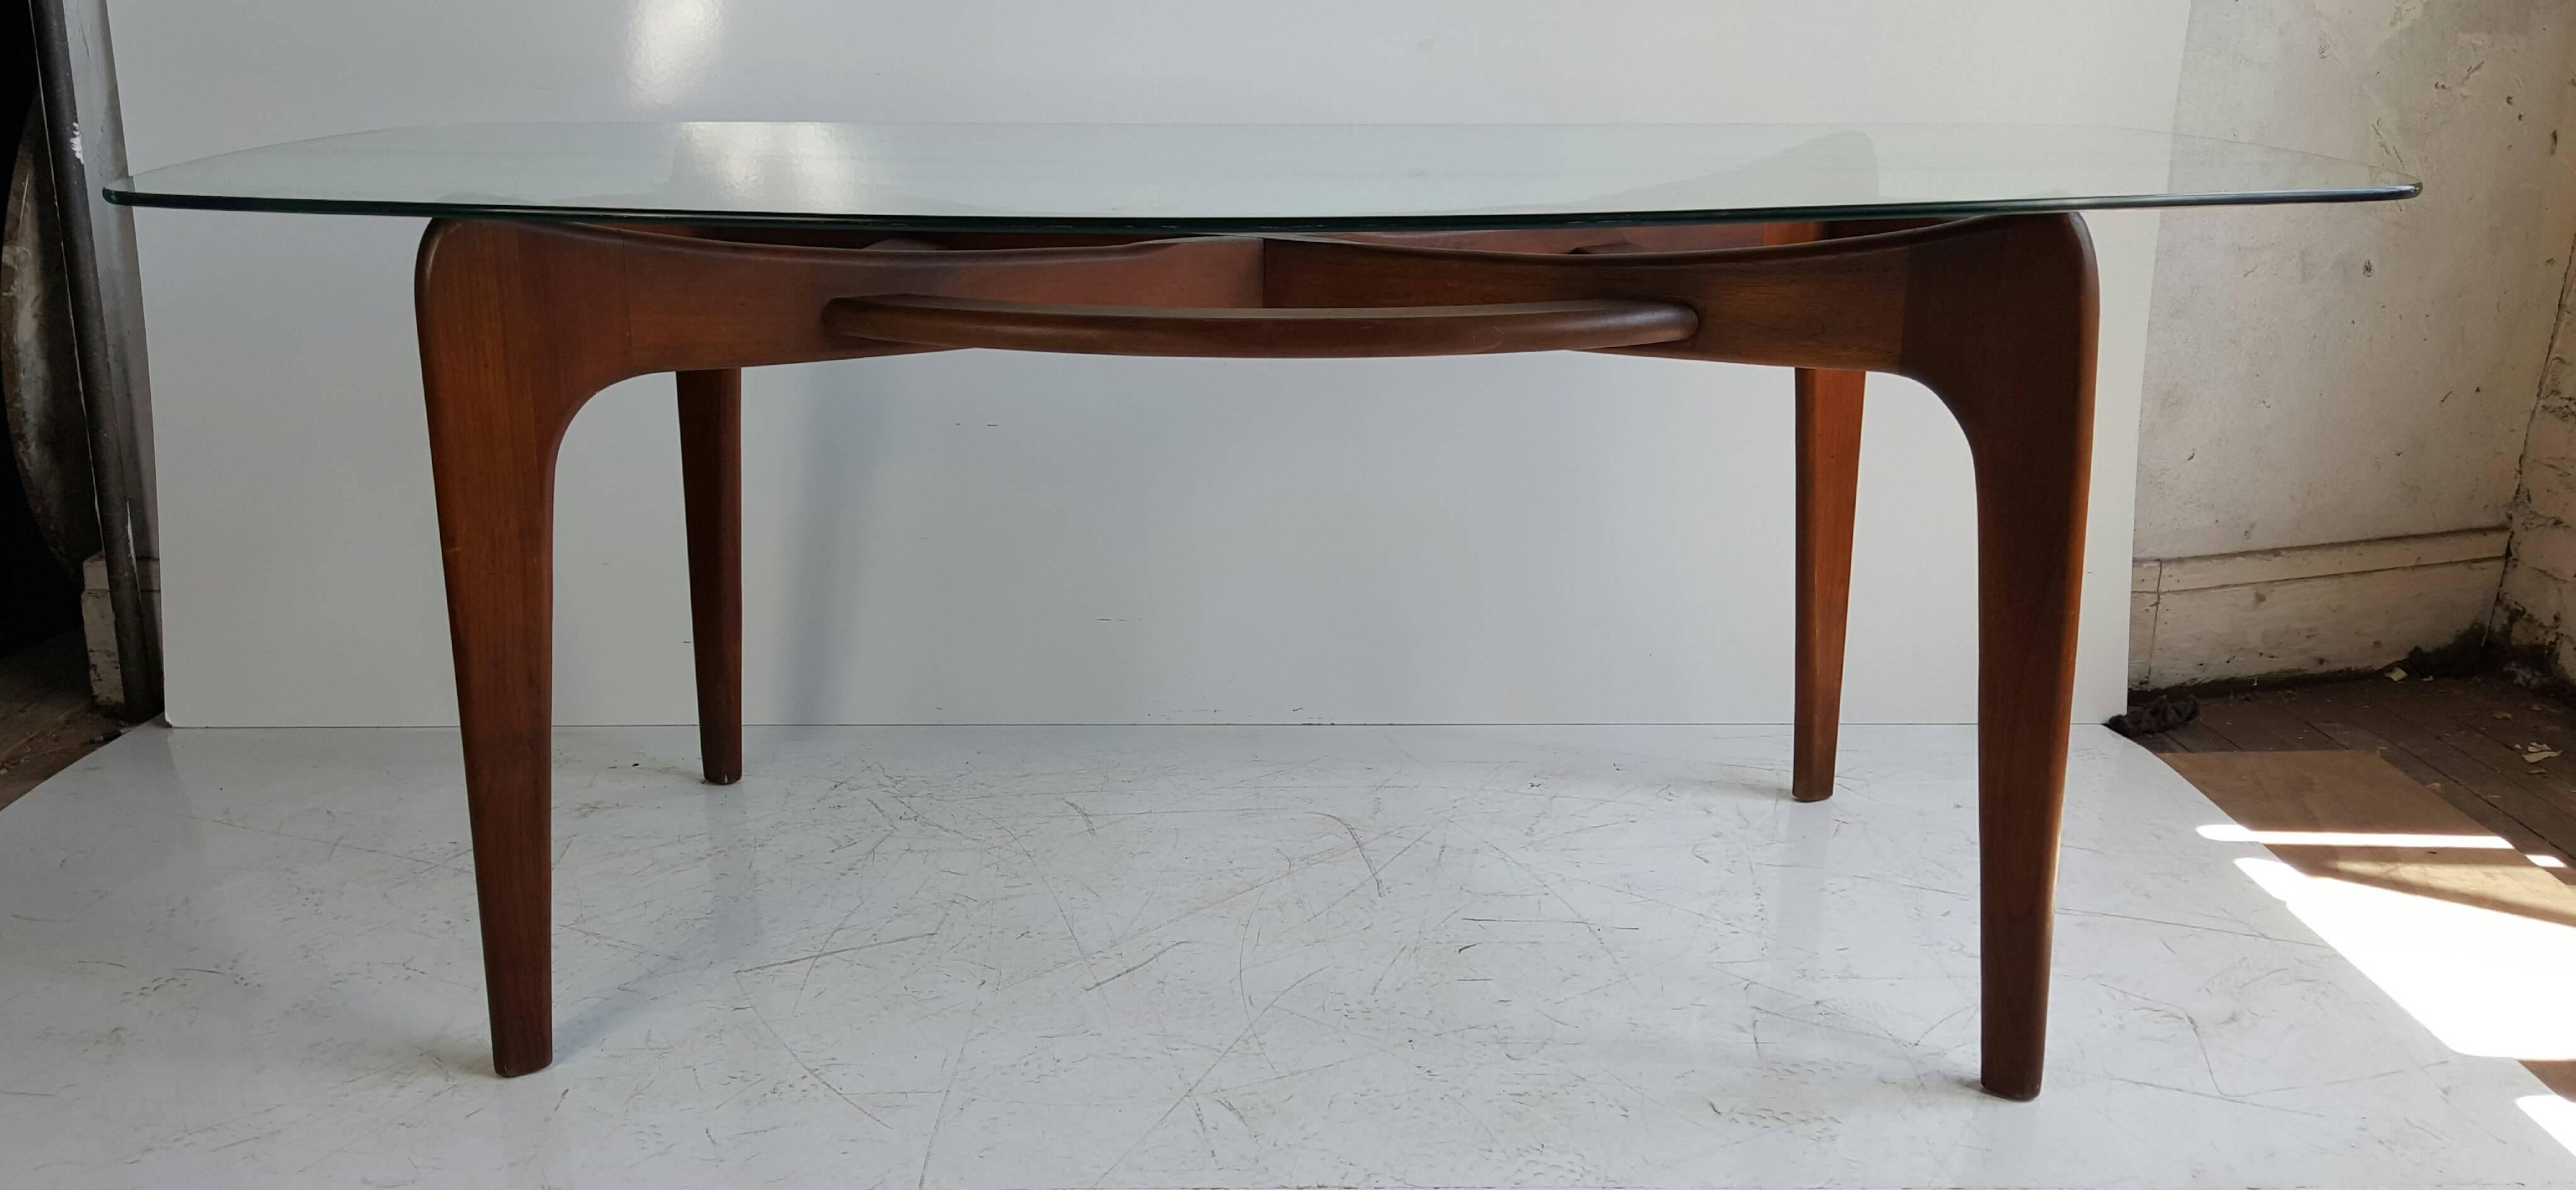 Boat-shaped glass topped dining table with Pearsall's sculptural walnut base as support by his company Craft Associates model 2179-T, Classic Mid-Century Modern design.